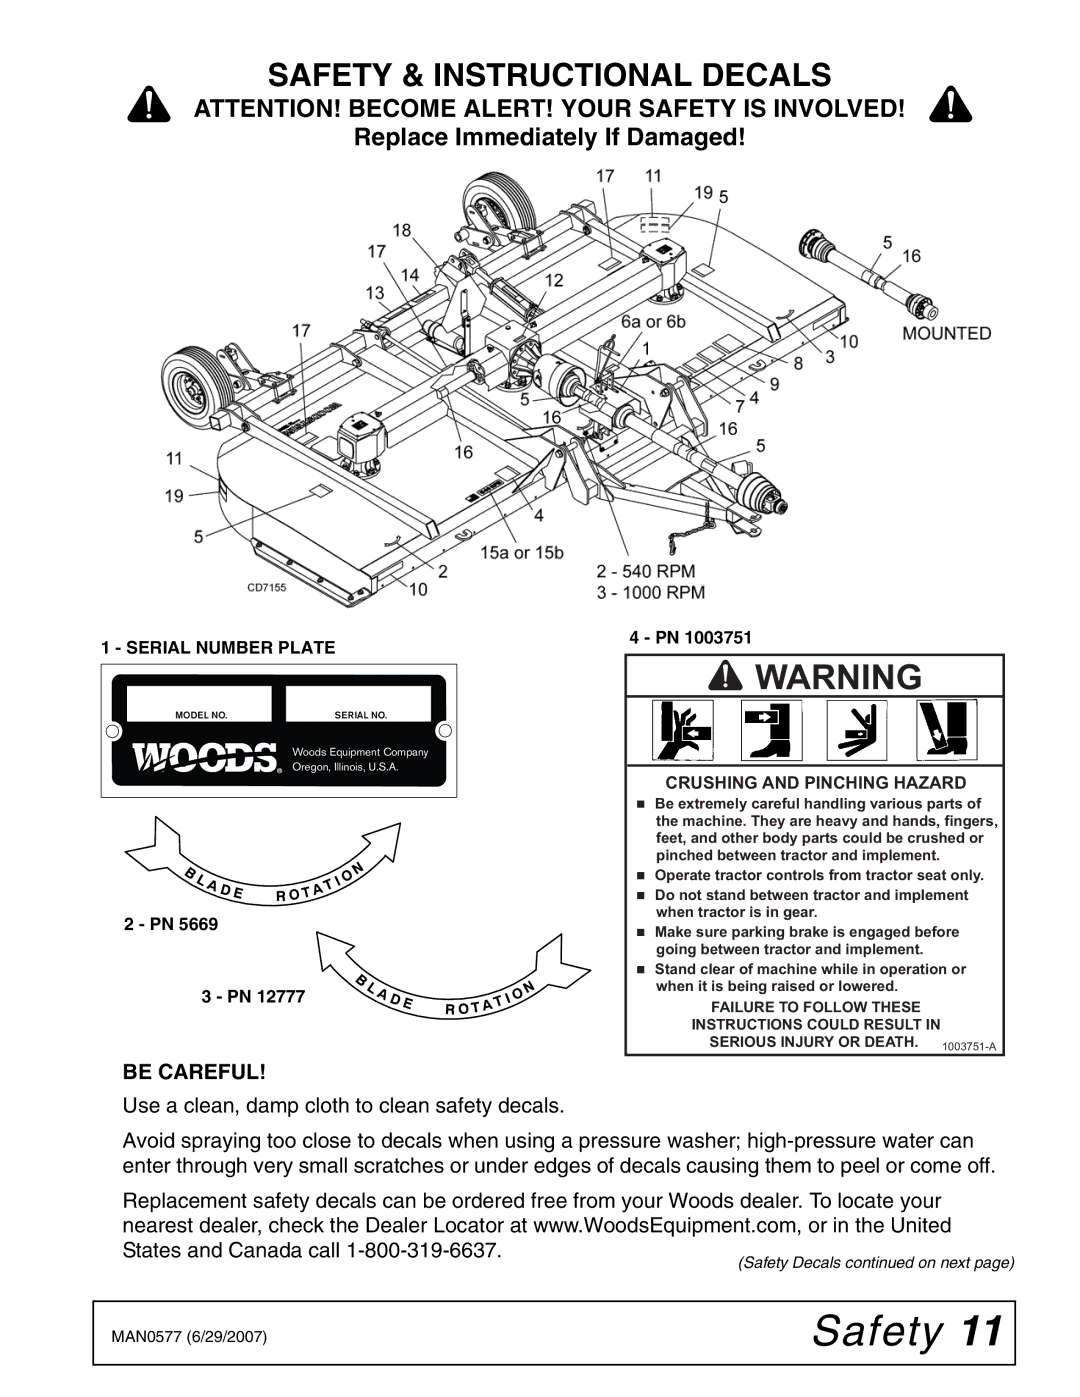 Woods Equipment TS1680Q manual Safety & Instructional Decals, Be Careful 